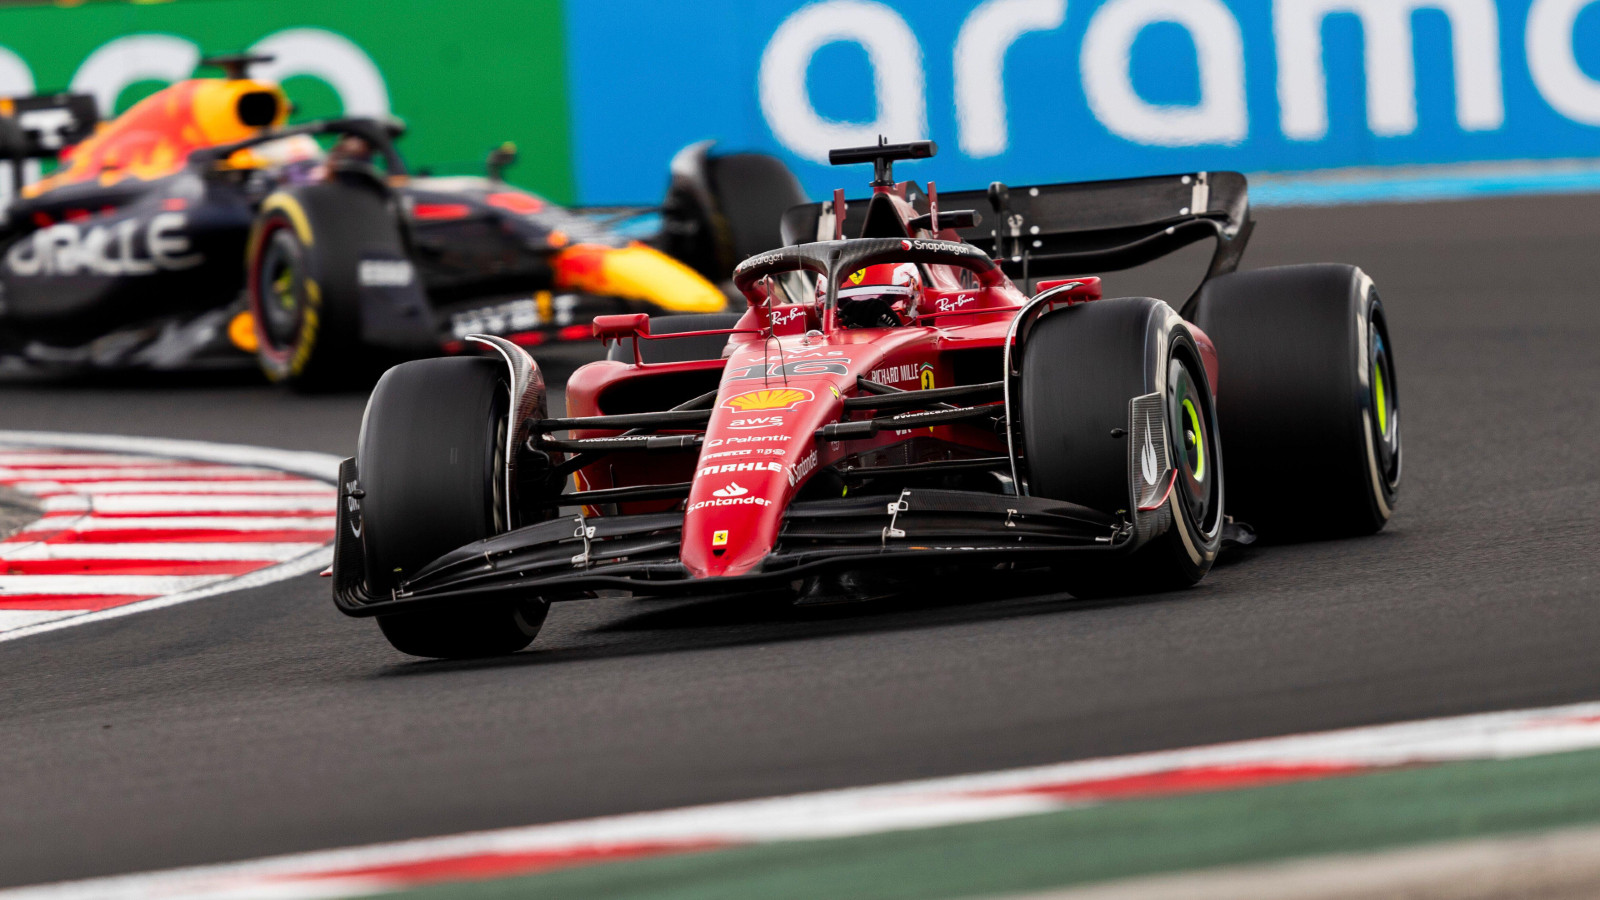 Ferrari's Charles Leclerc in action at the Hungarian Grand Prix. Budapest, July 2022.